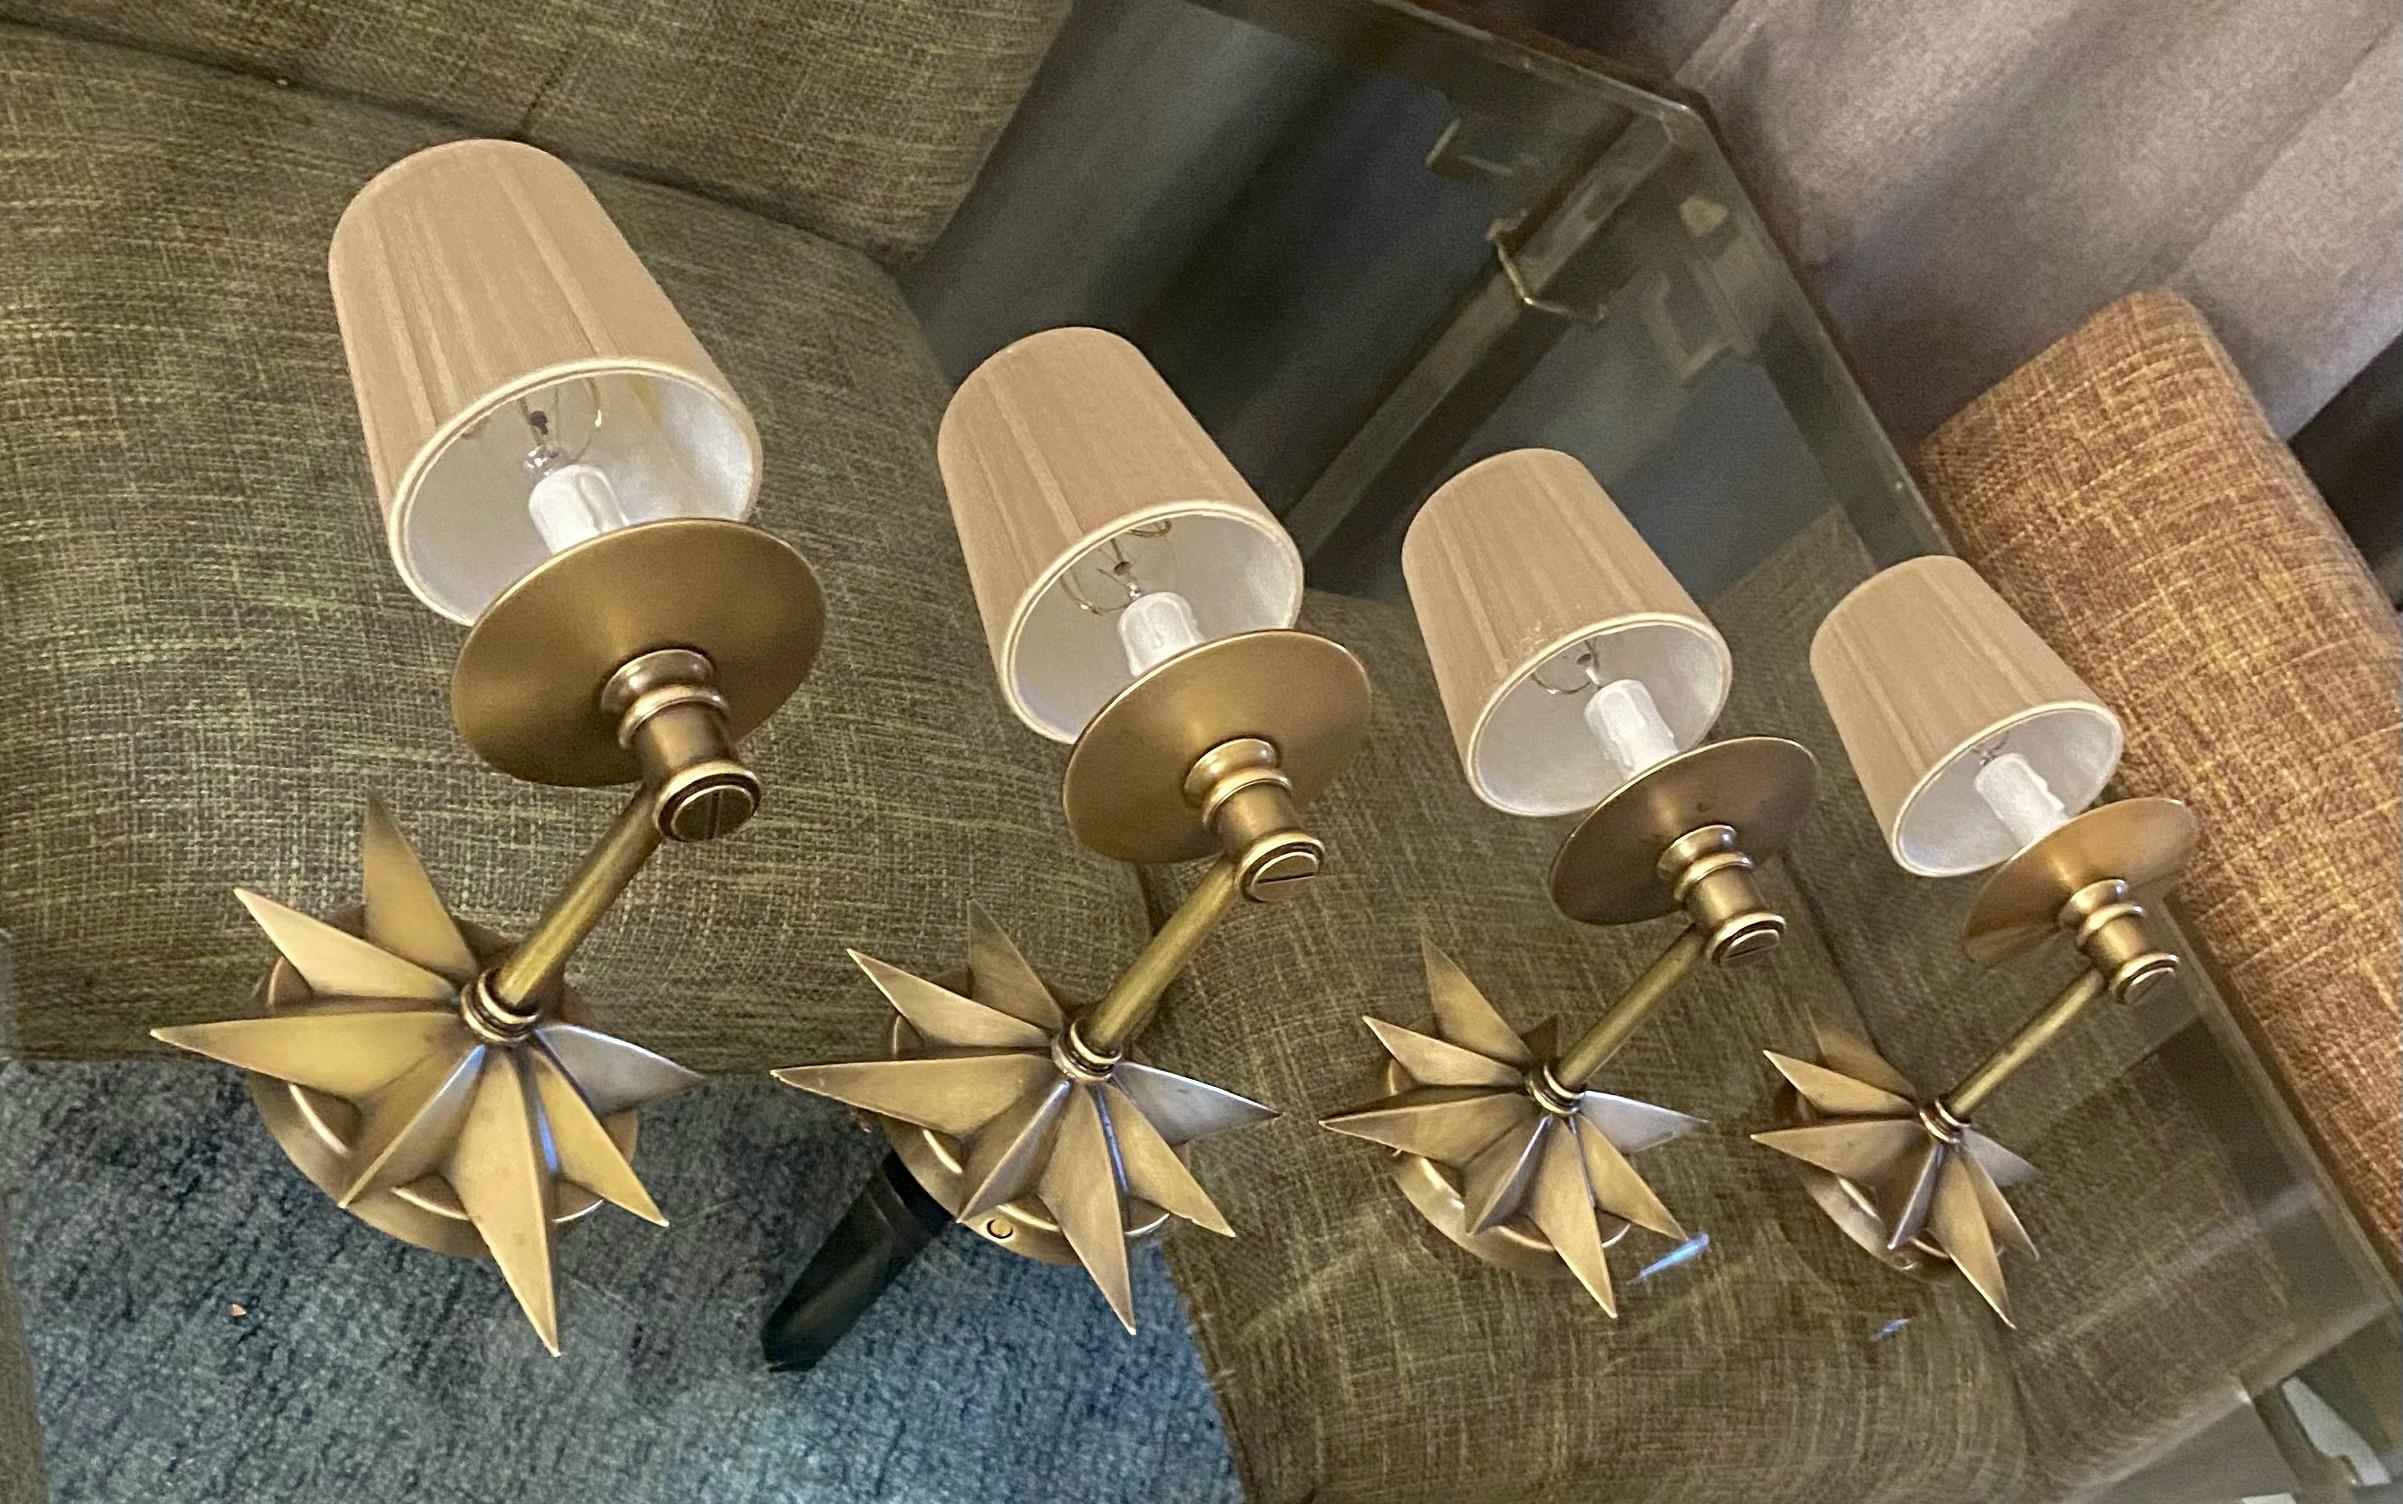 Set of 4 (four) 1930s deco period solid bronze 1 arm wall sconces light with sunburst or starburst motif. The unique star design wall lights are expertly crafted of thick solid bronze. Each sconce uses candelabra base bulb. Newly wired for us